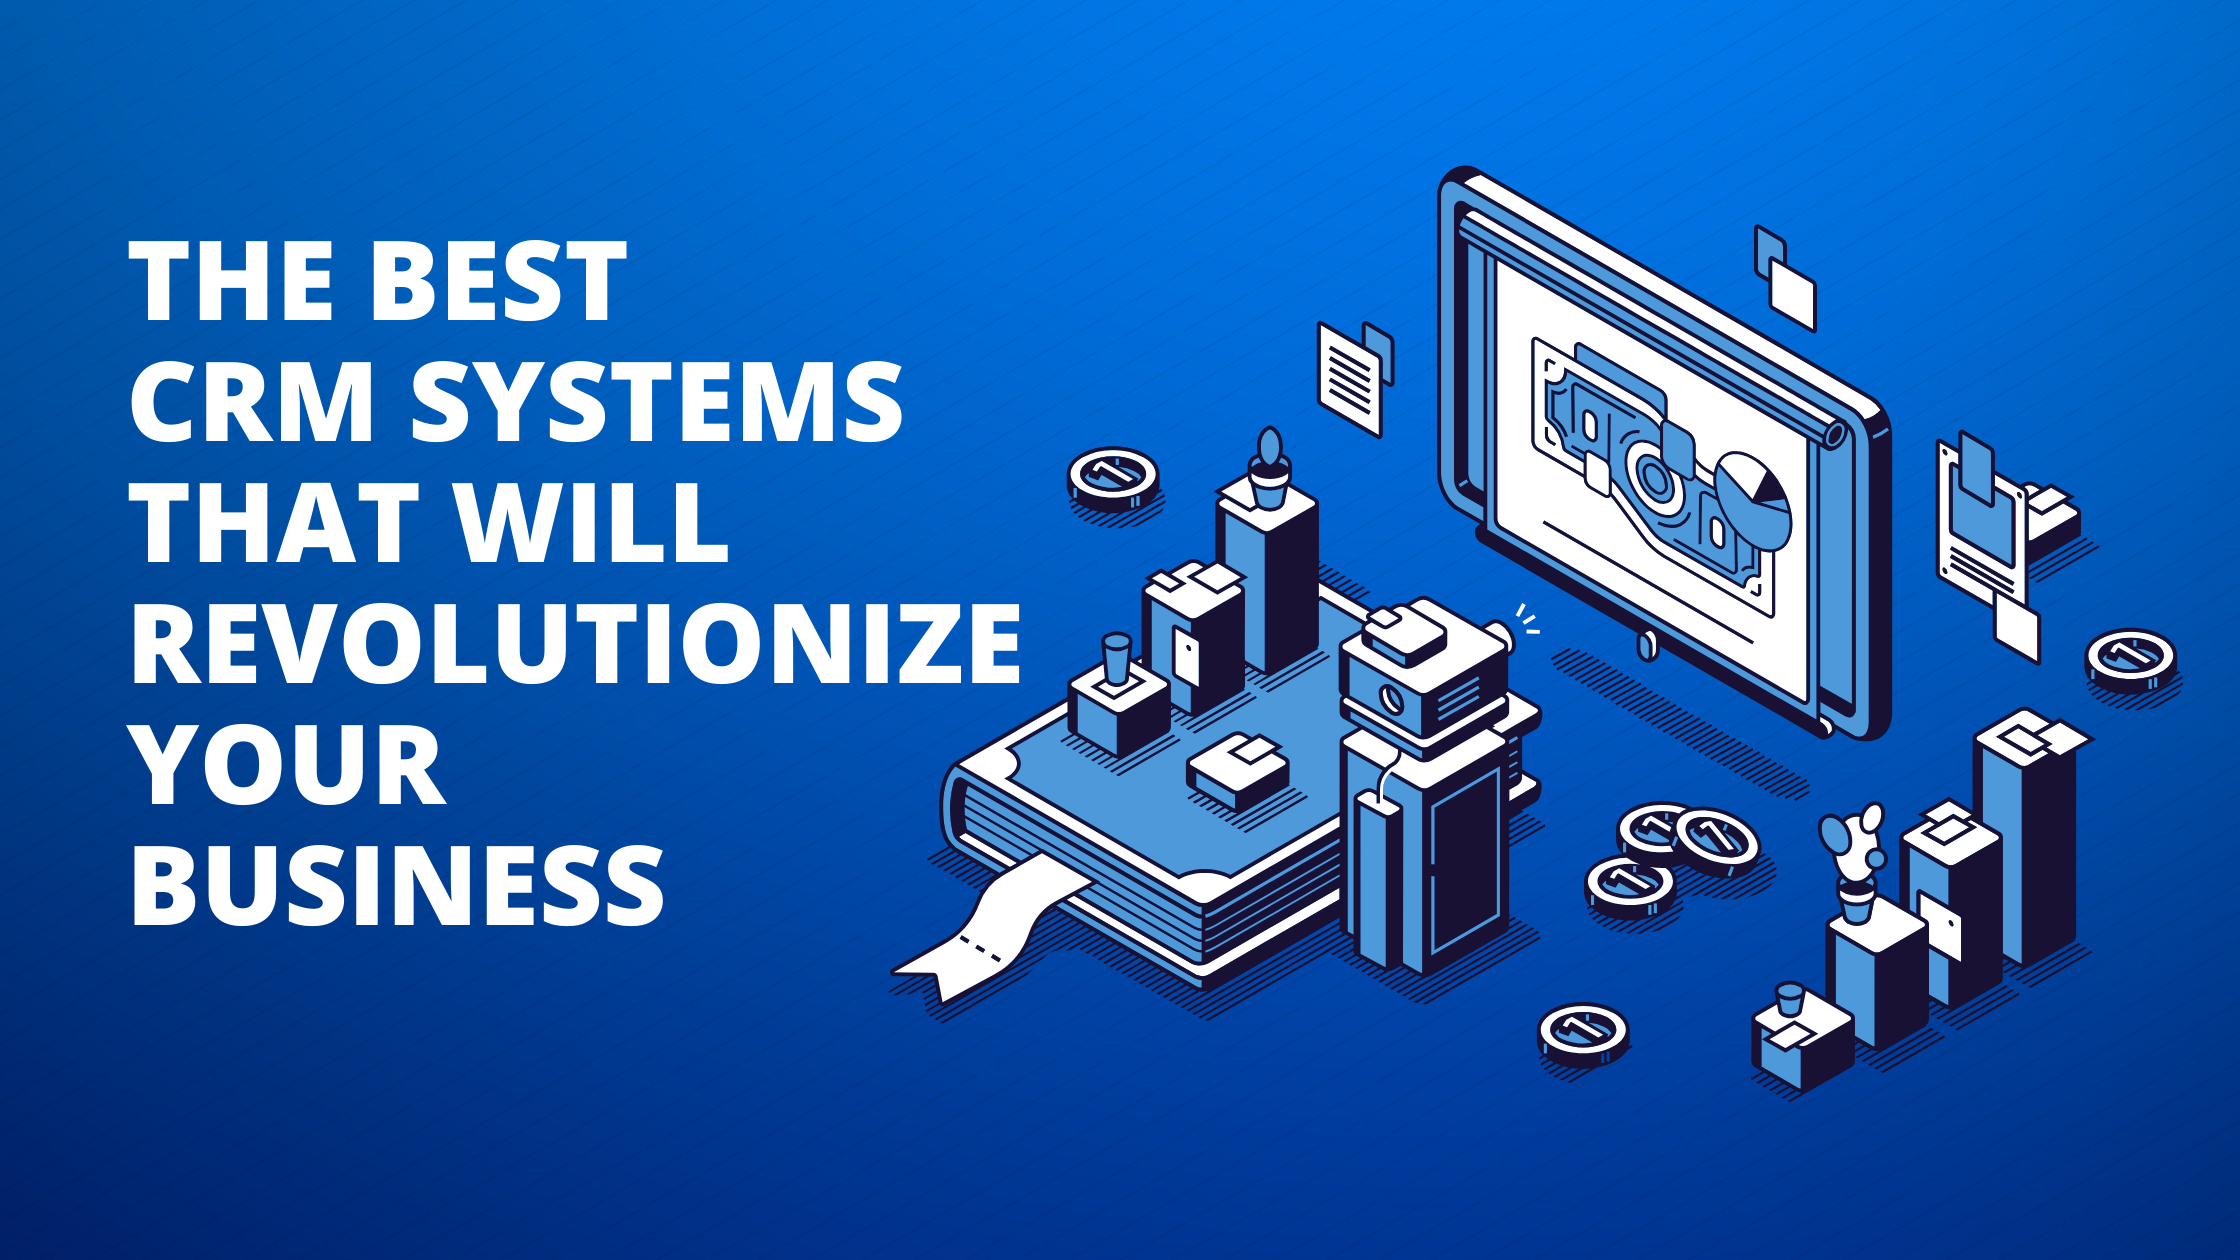 The Best CRM Systems That Will Revolutionize Your Business